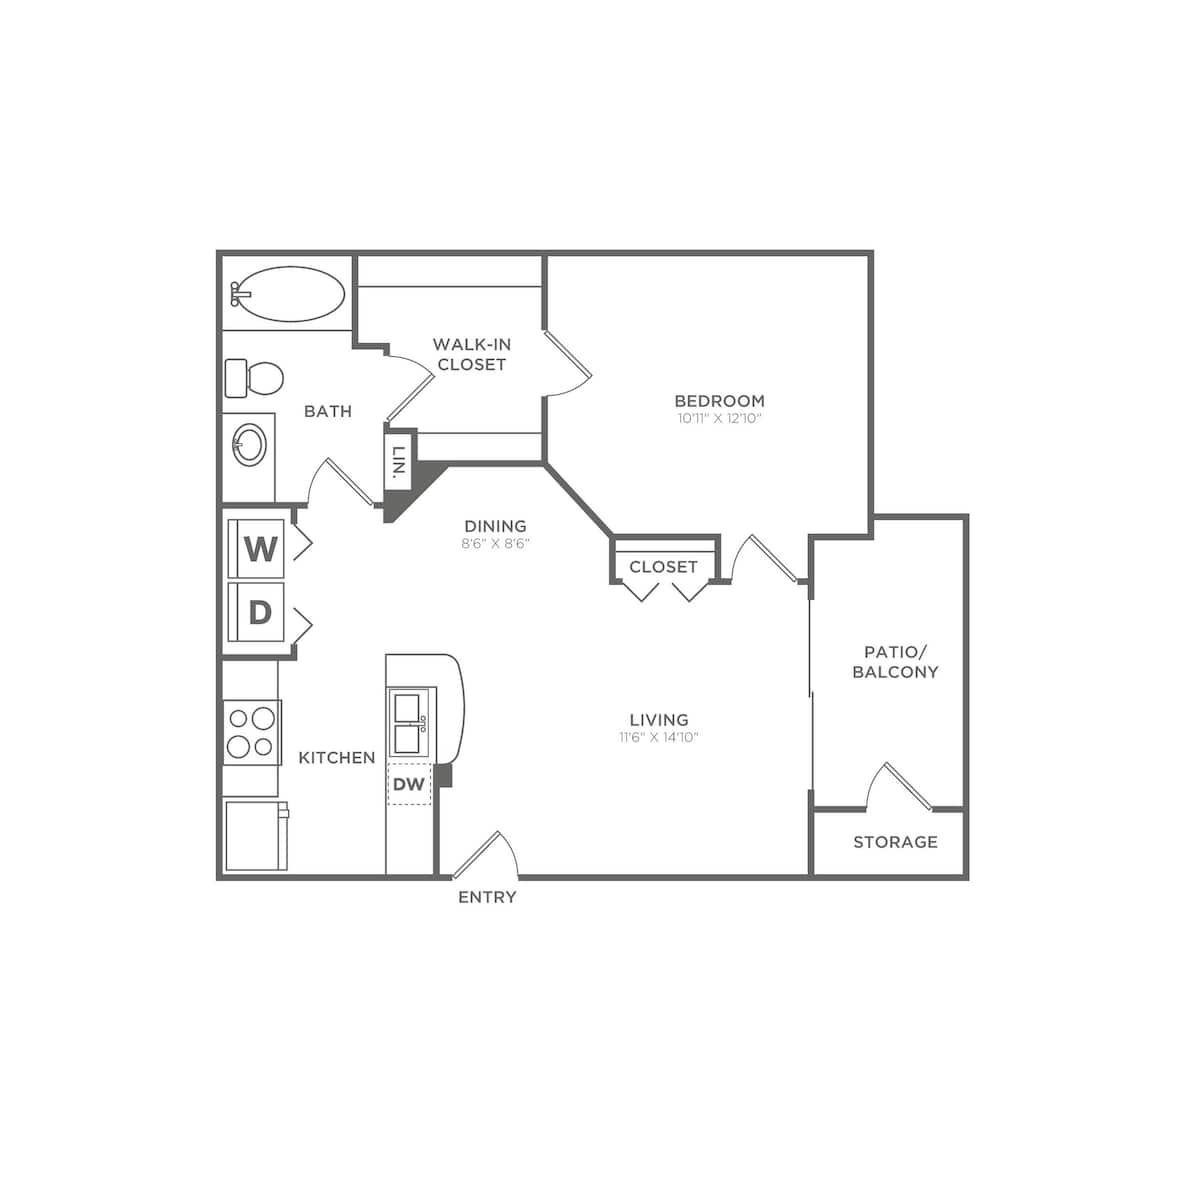 Floorplan diagram for A-Classic, showing 1 bedroom